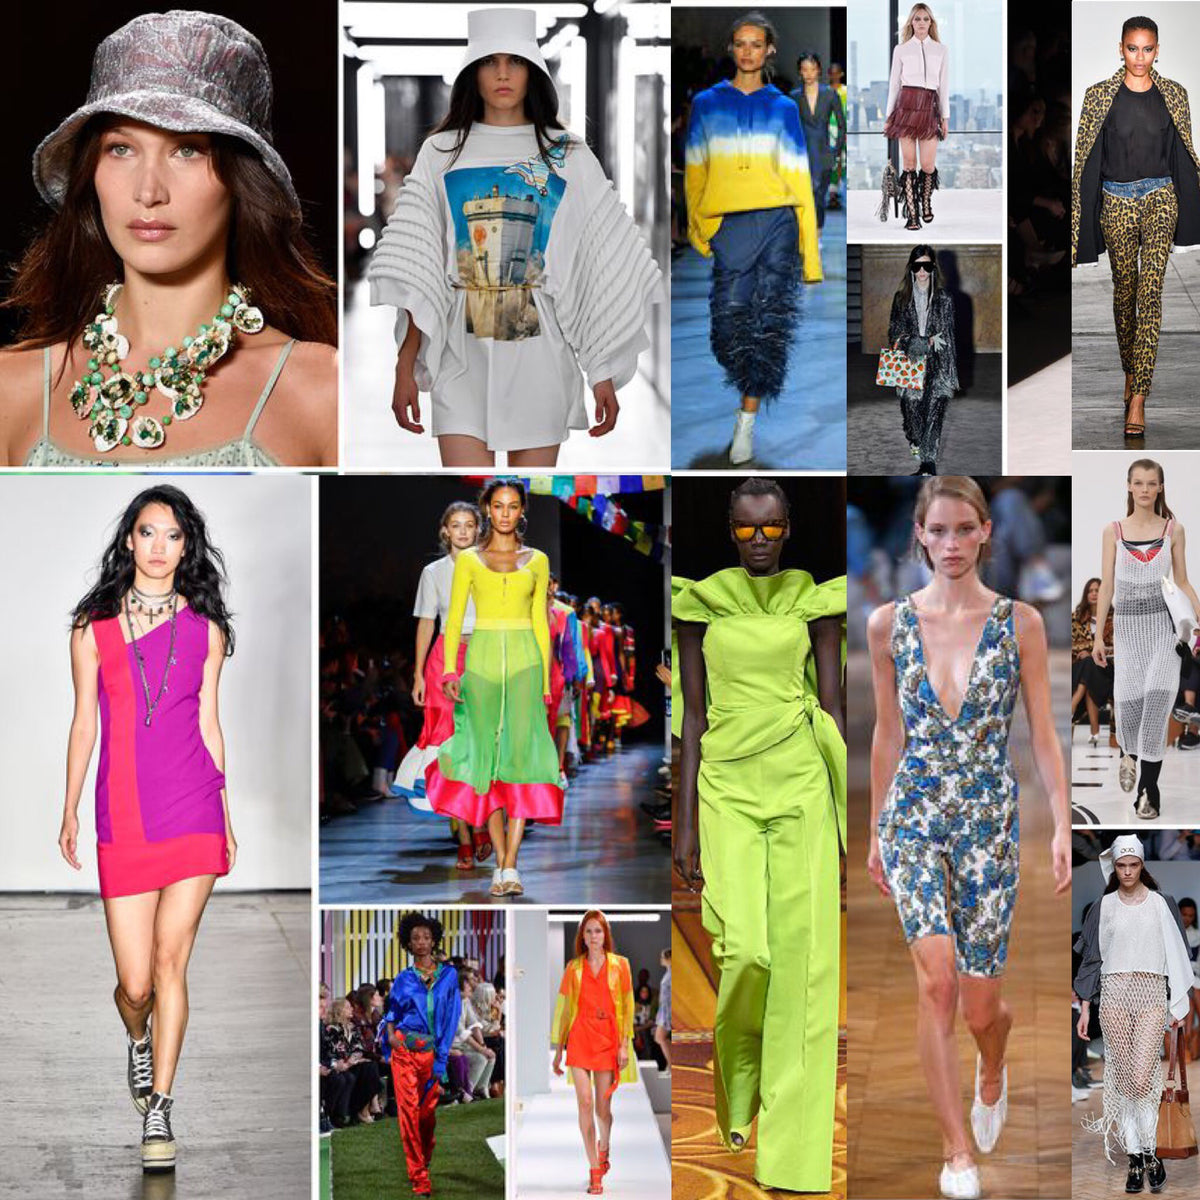 Spring Summer 2019 fashion trends you need to know – Le RIVINO's